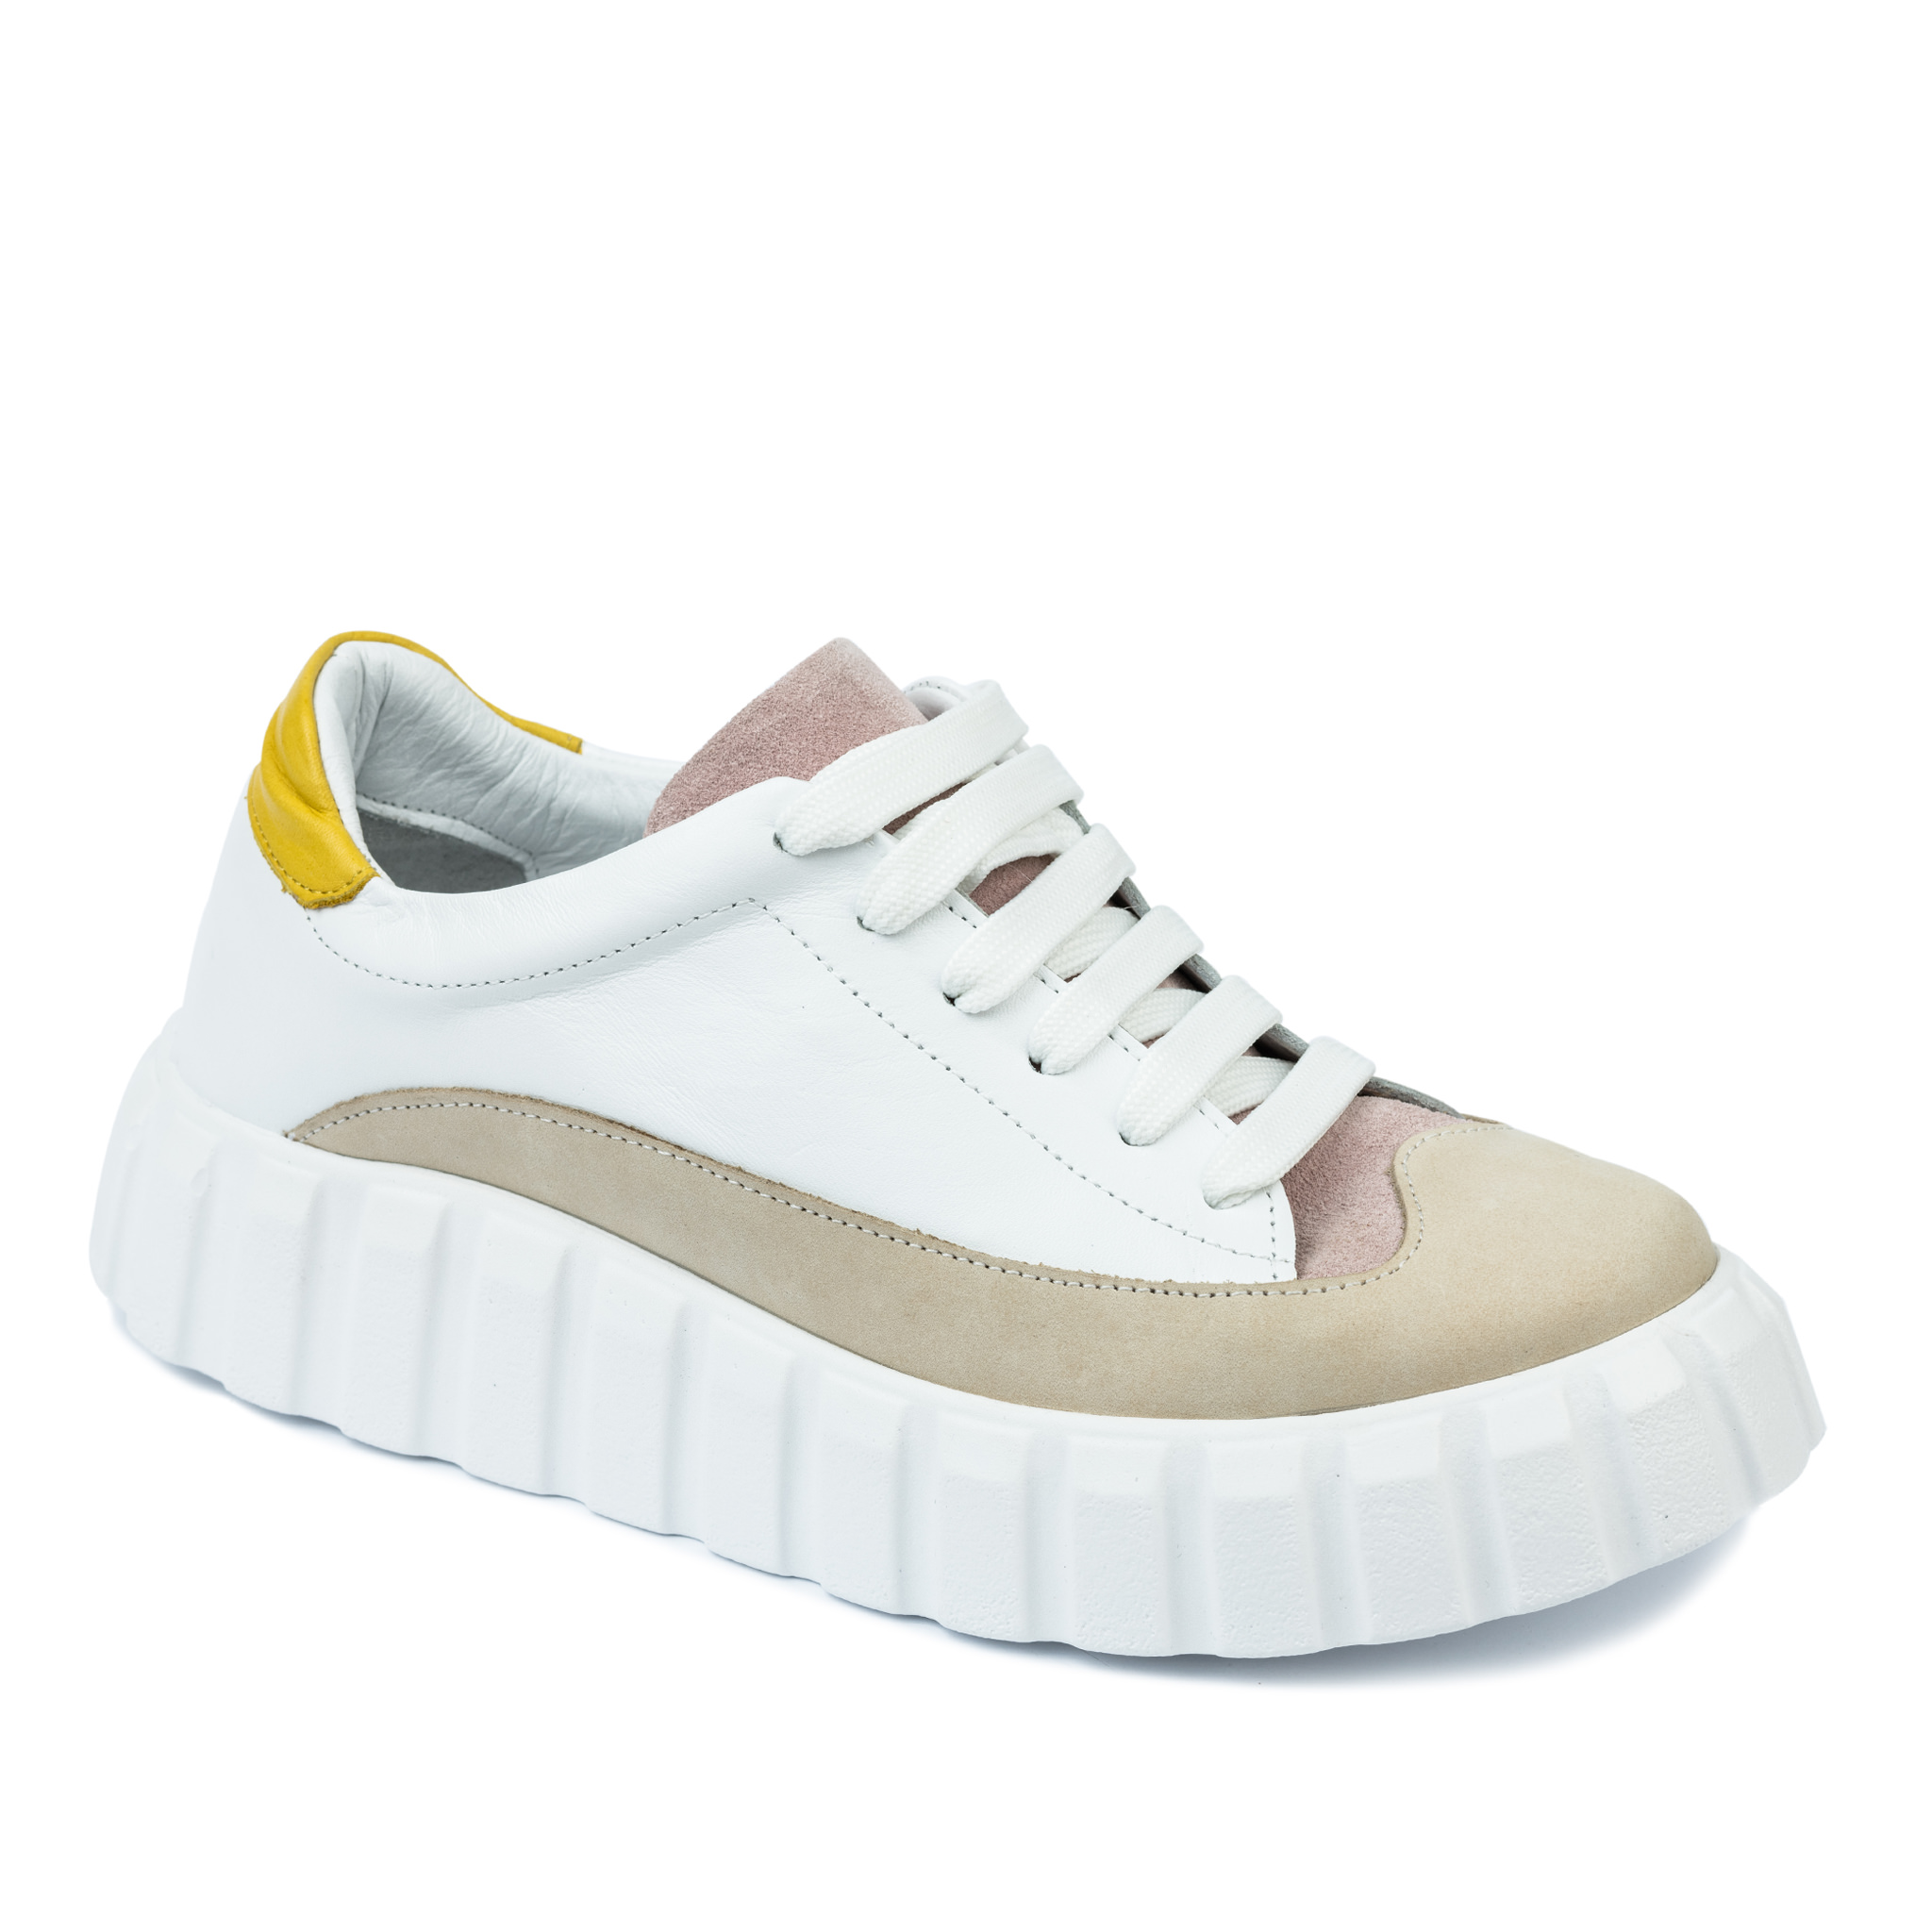 Leather sneakers A323 - BEIGE